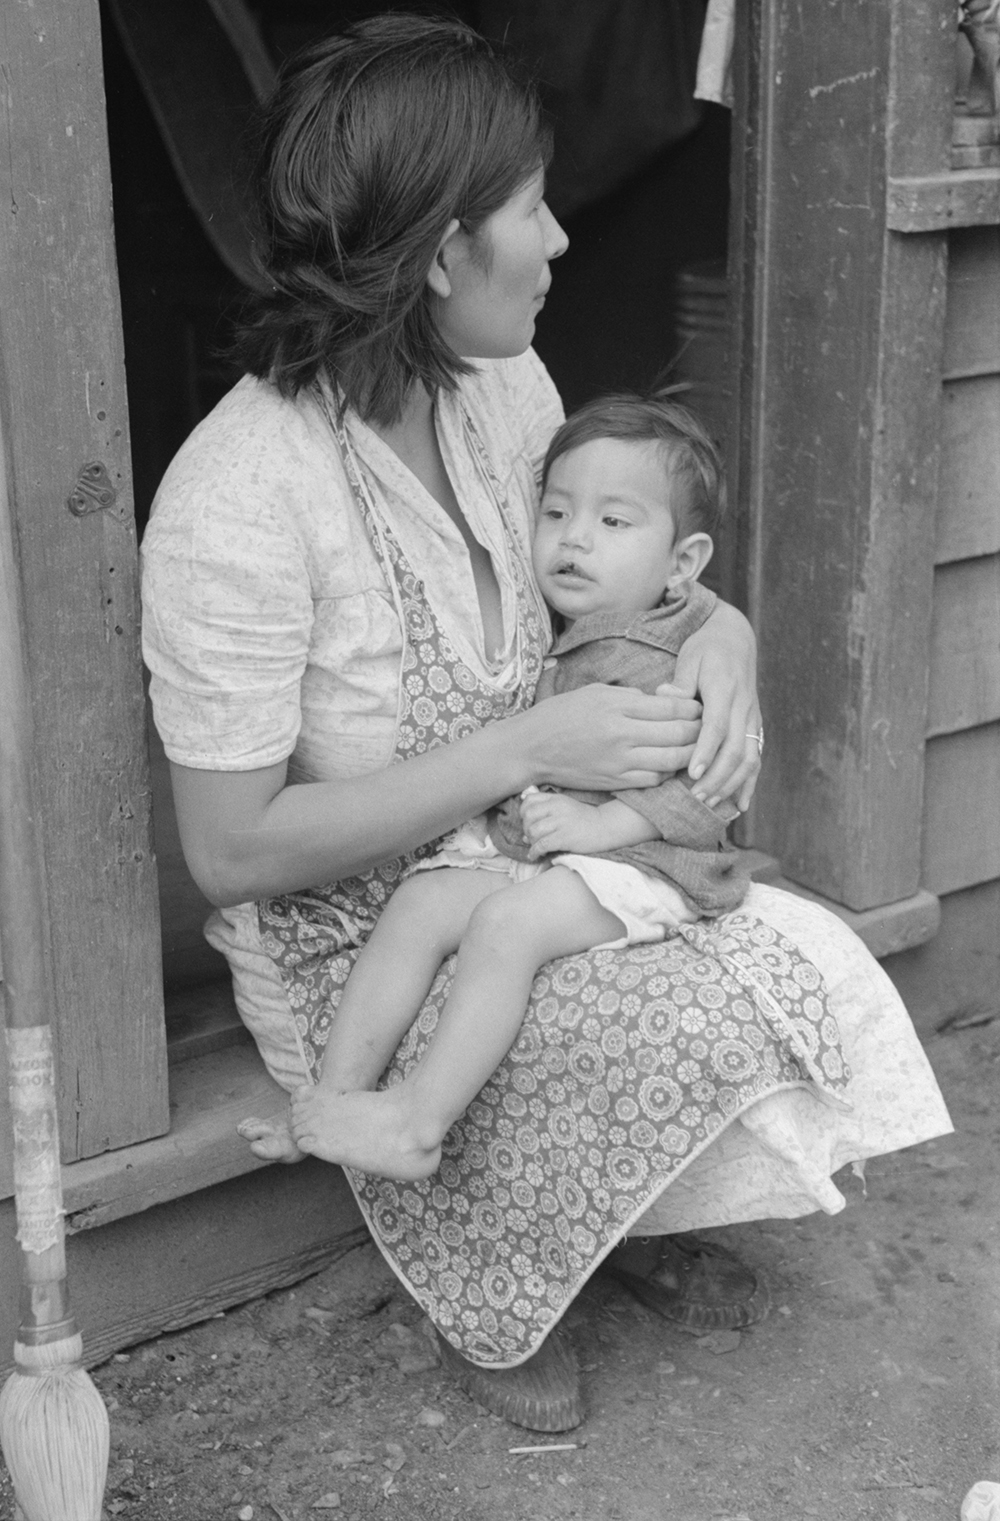 Mexican woman and child, San Antonio, Texas, 1939. Photograph by Russell Lee. Library of Congress, Prints and Photographs Division.